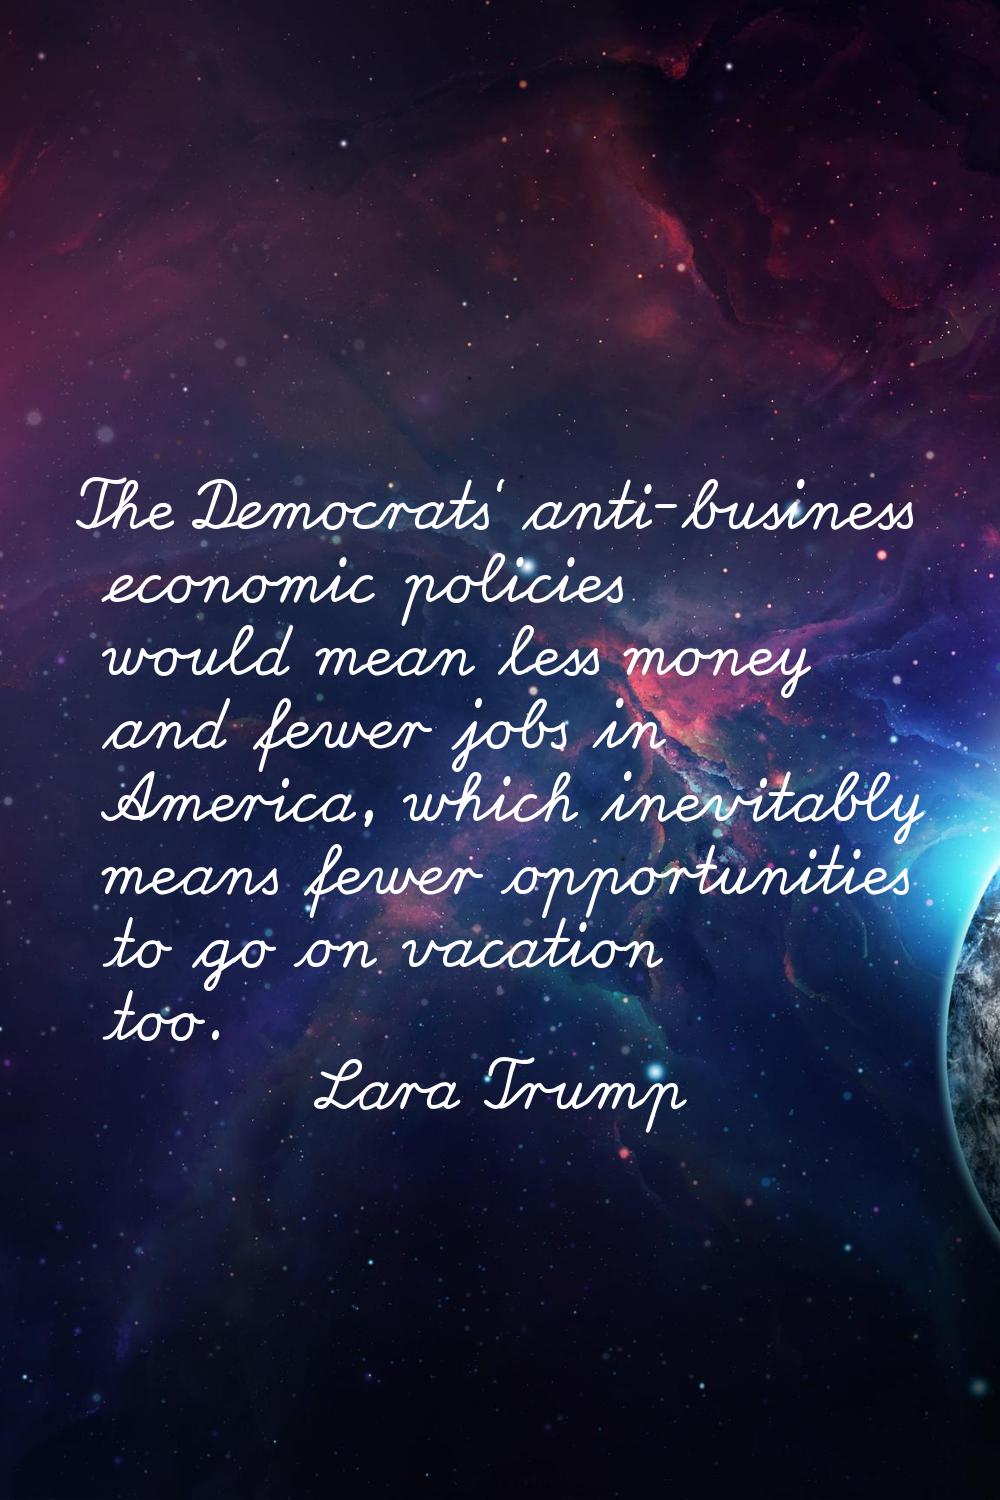 The Democrats' anti-business economic policies would mean less money and fewer jobs in America, whi